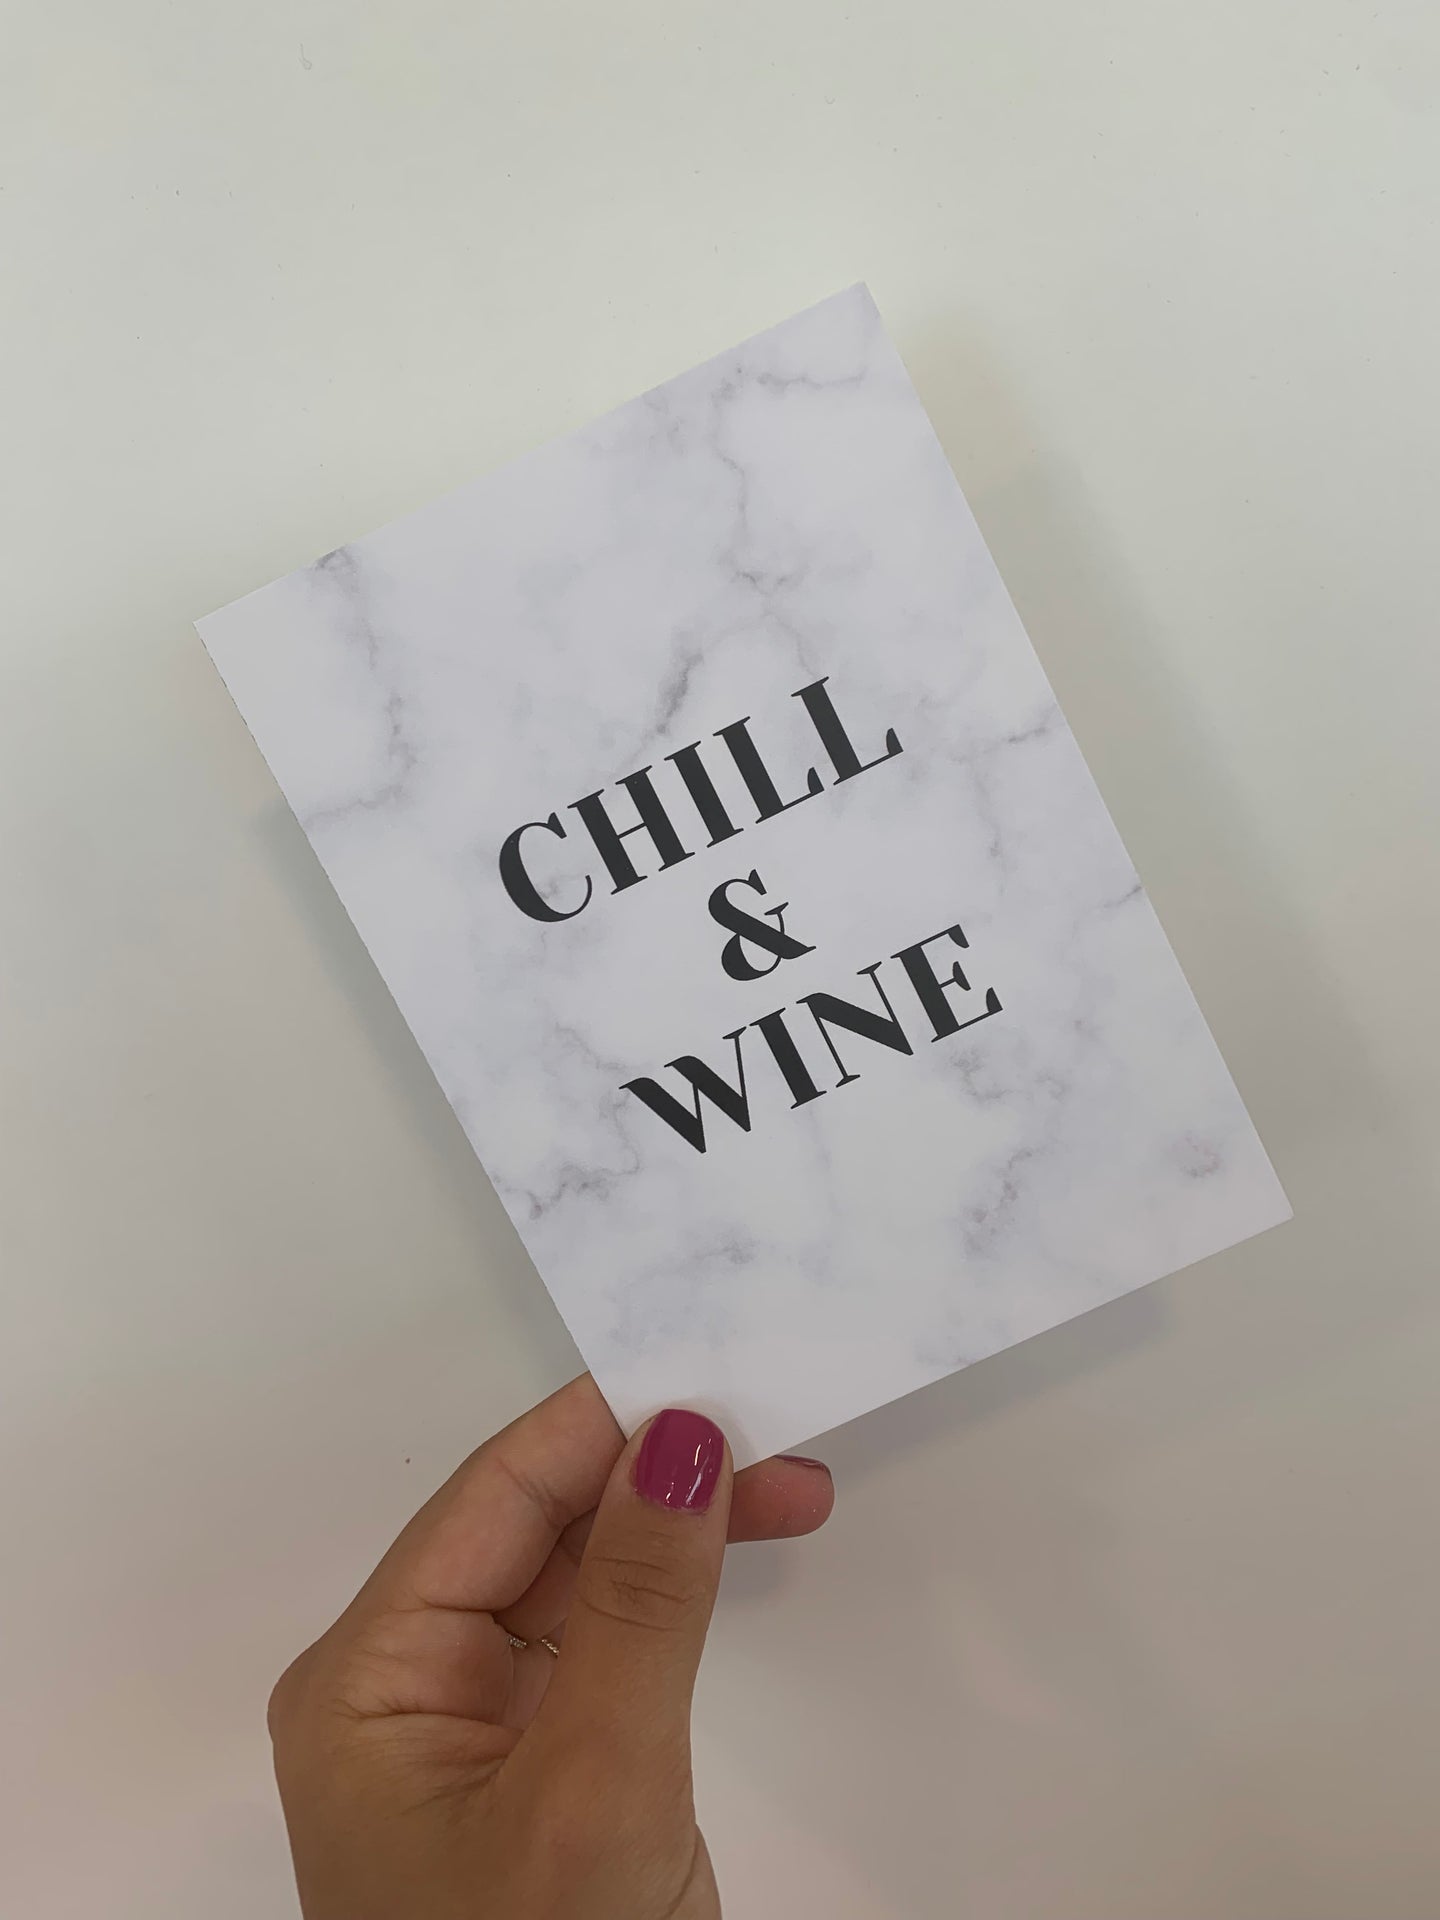 CHILL& WINE ... - KARTE BY SARA BECKER - THE LABEL